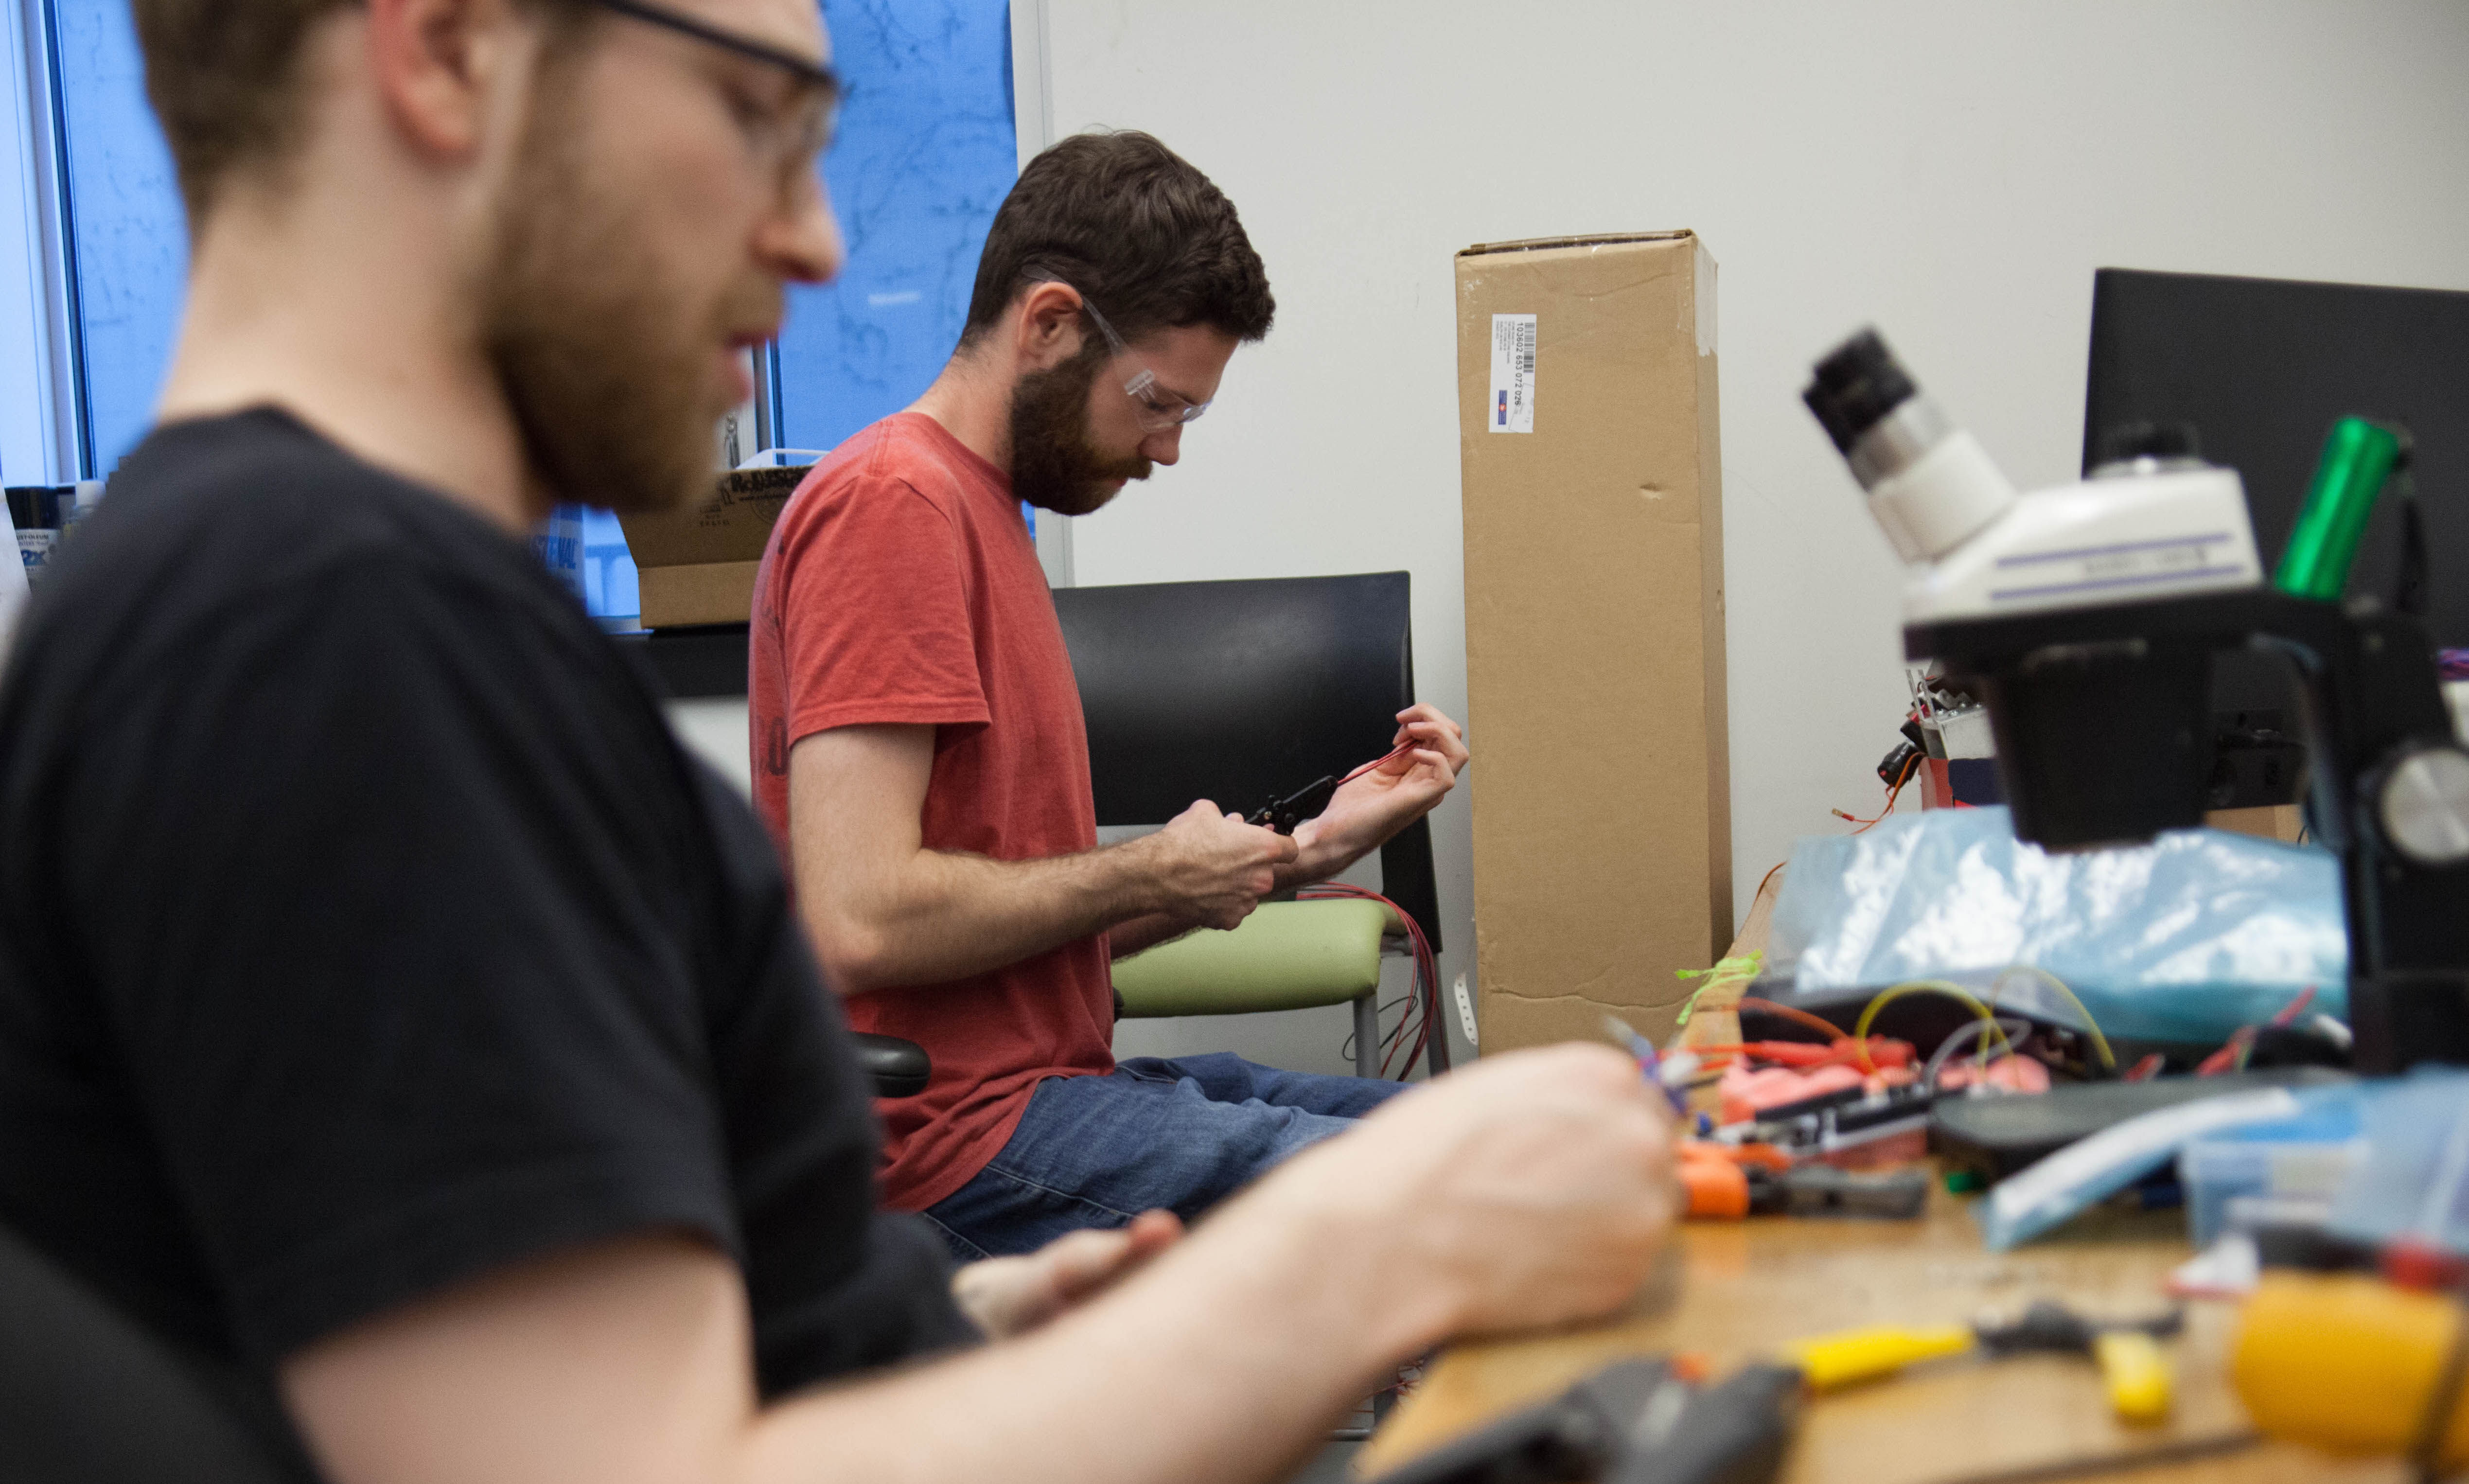 two people sit a desk and use tools to adjust wiring